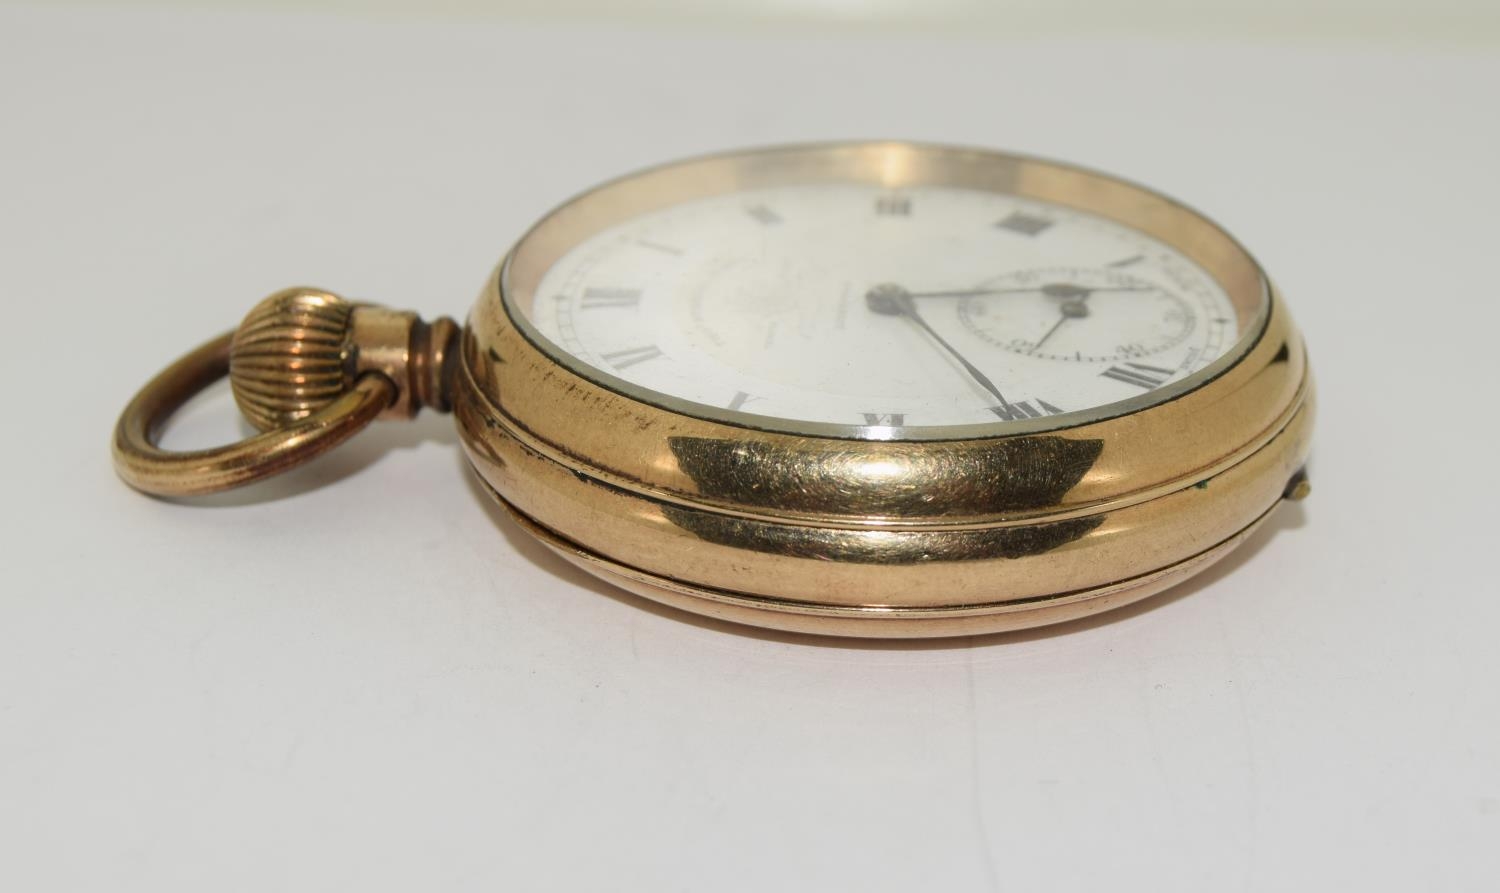 Thomas Russell Liverpool working gold colour pocket watch. - Image 2 of 6